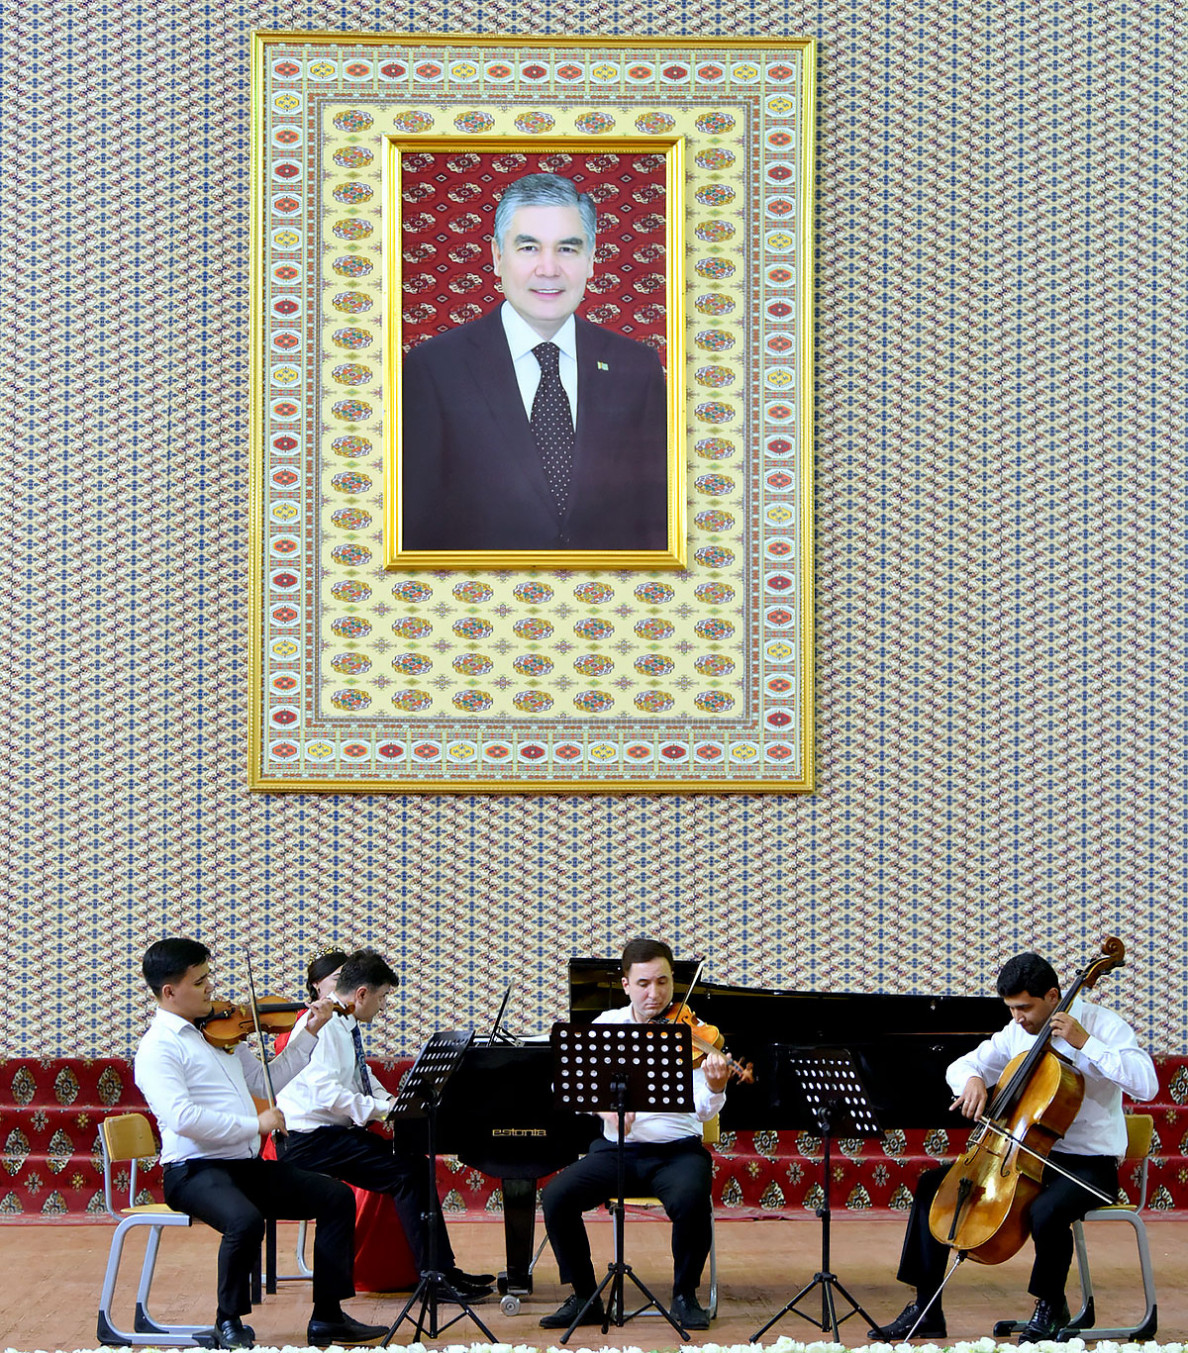 World of Feelings and Music by Antonín Dvořák: Czech Composer’s Works Performed in Ashgabat